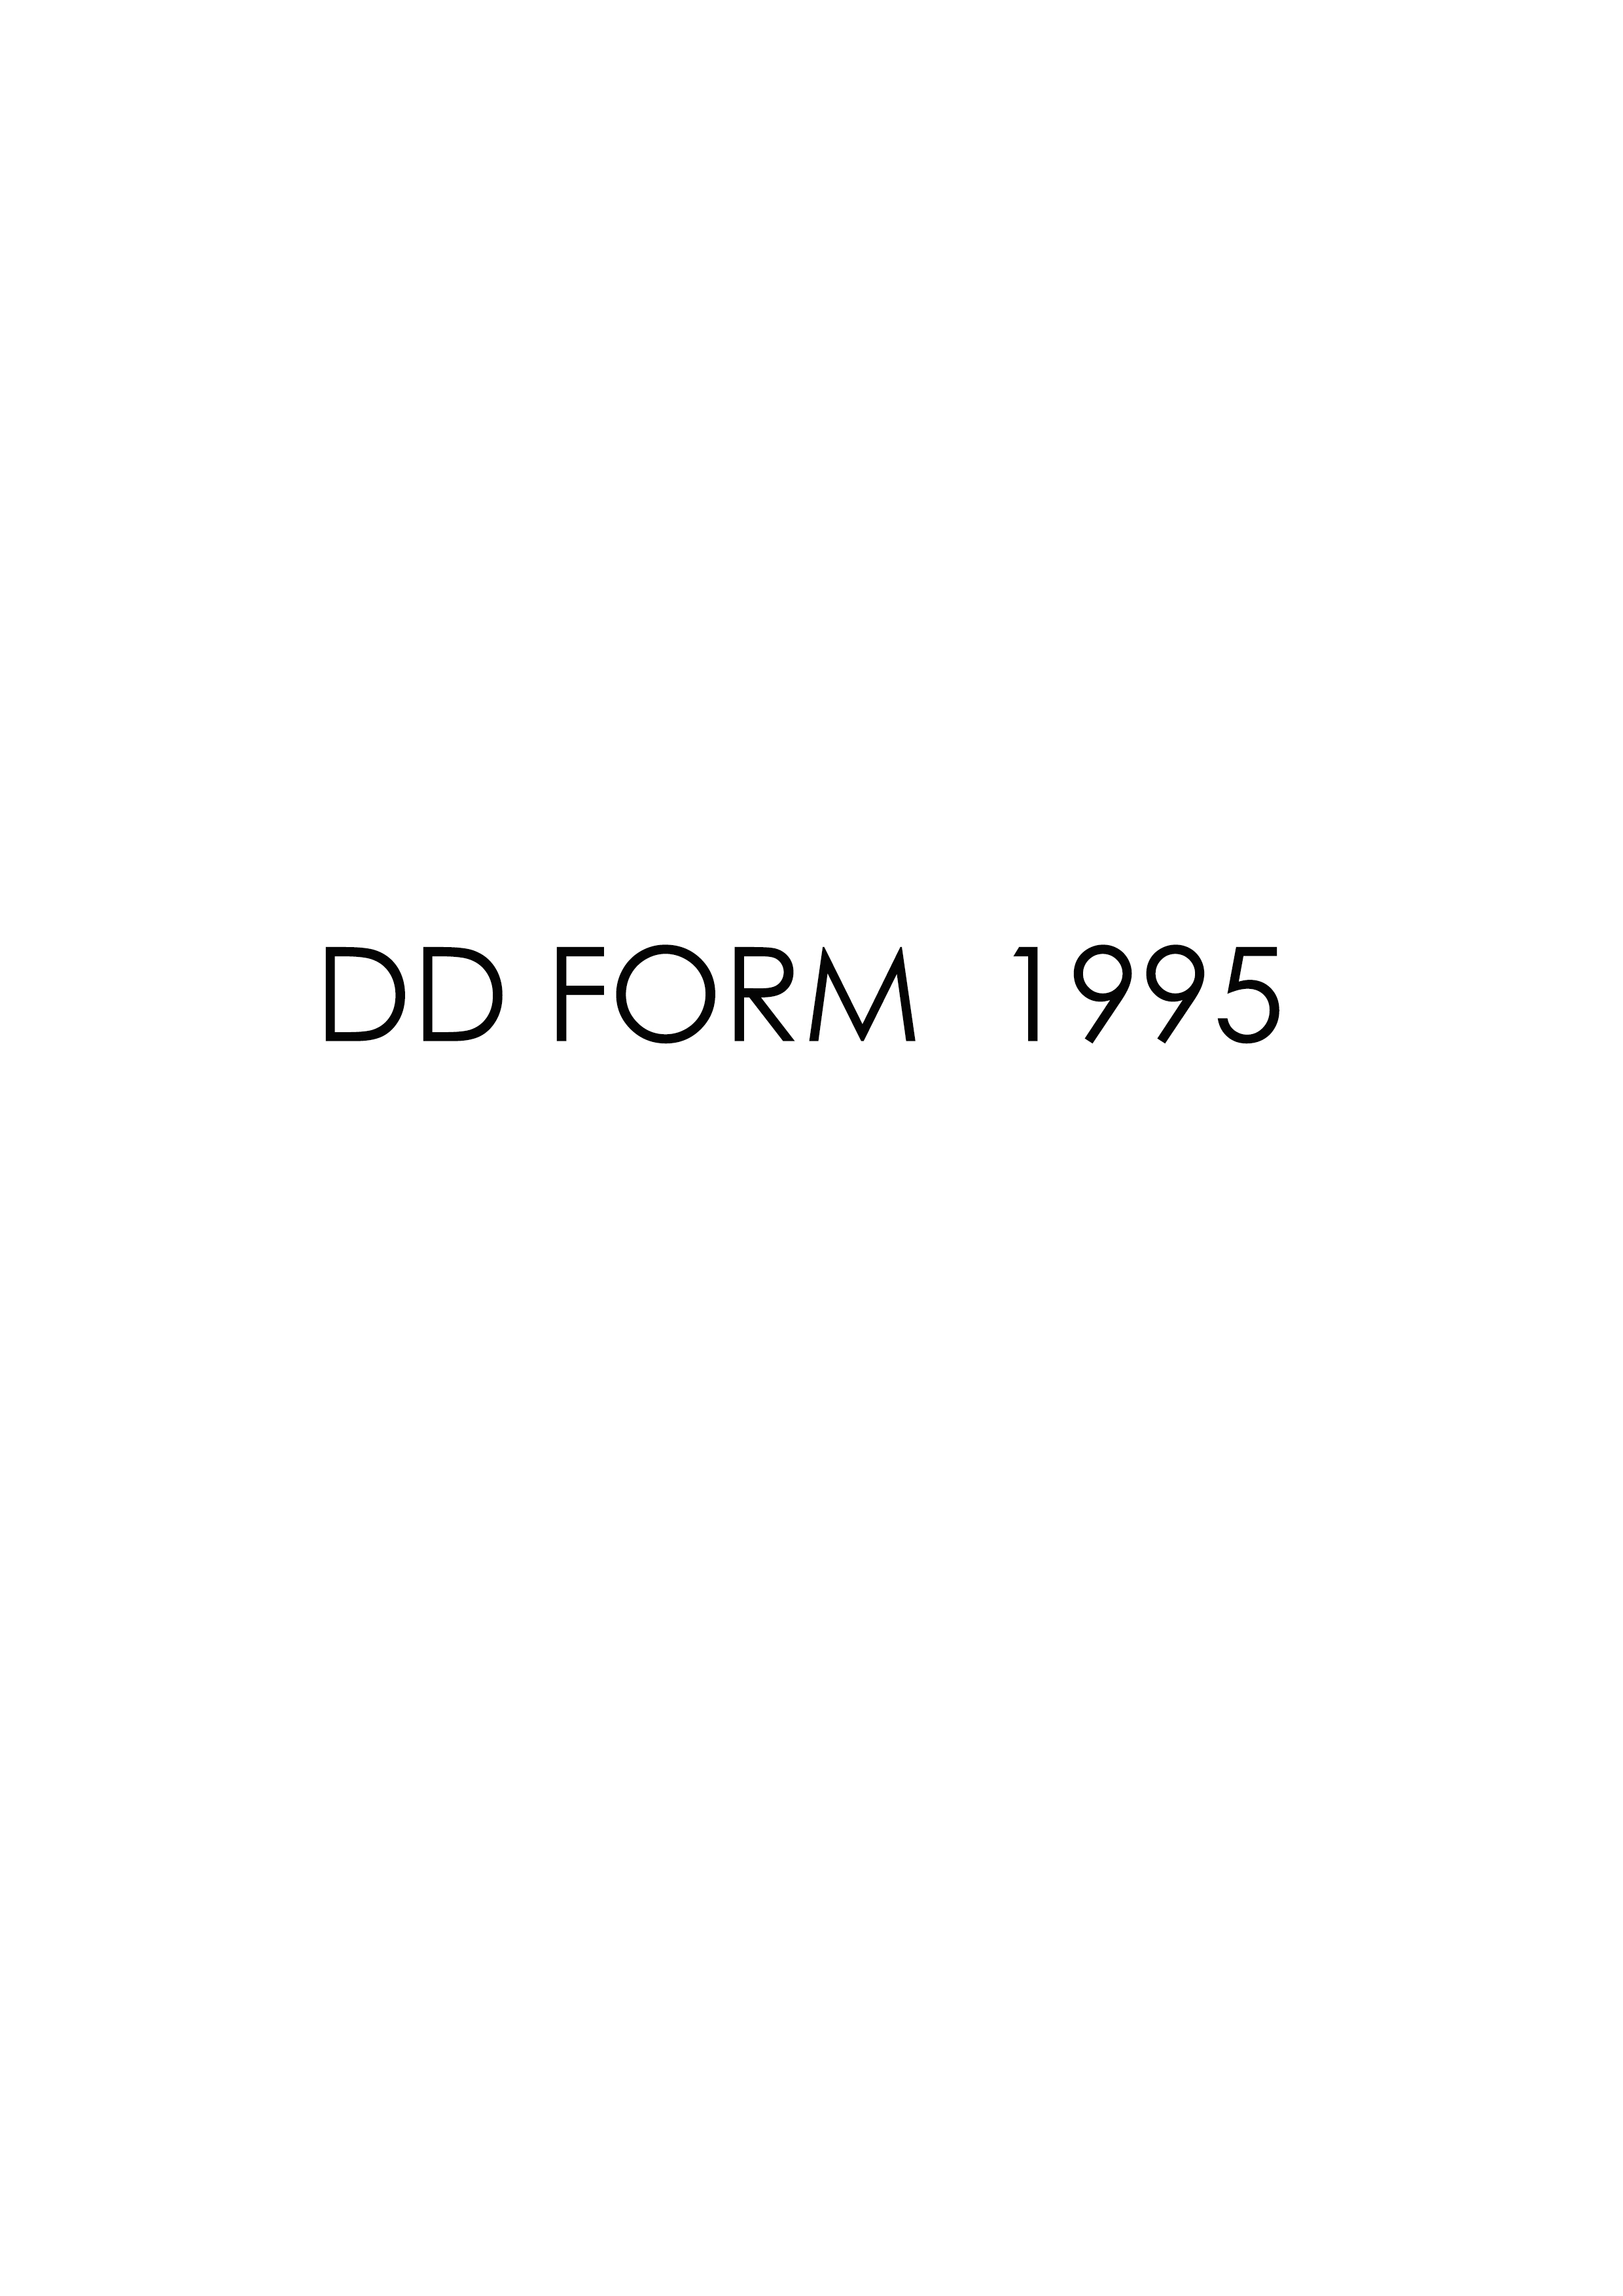 Download Fillable dd Form 1995